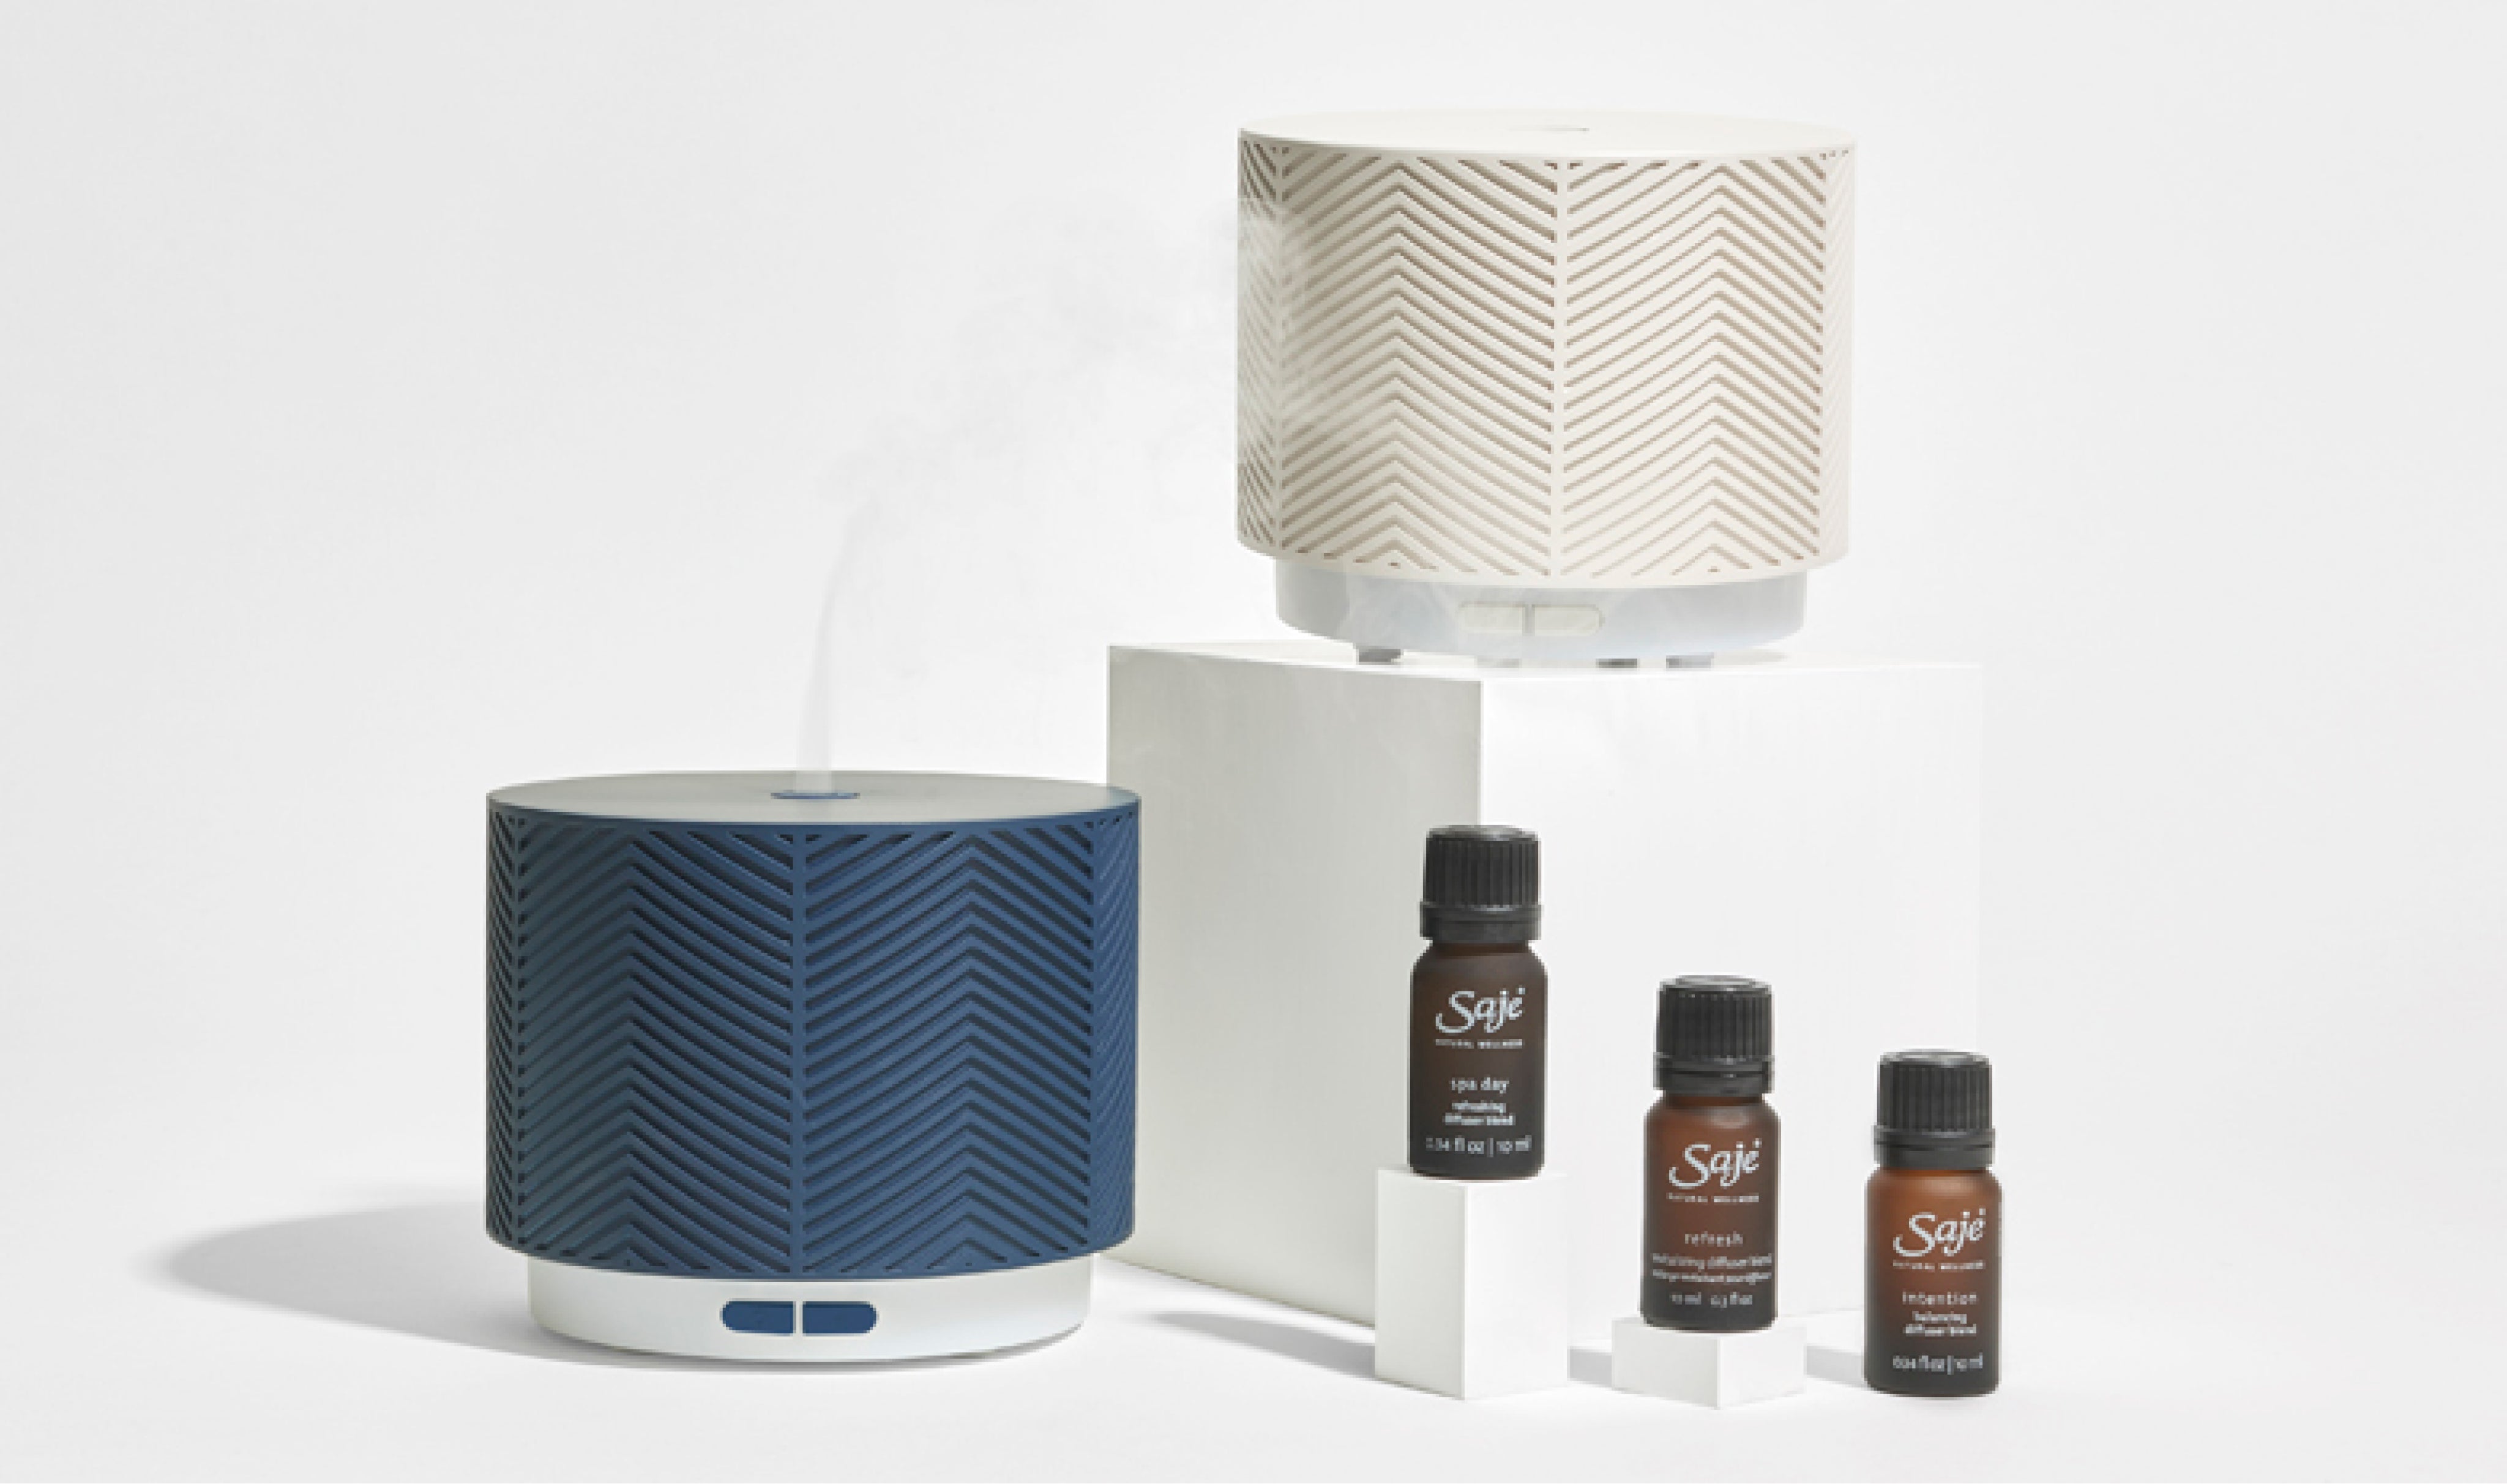 Aroma Nook diffusers and diffuser blends against a white background